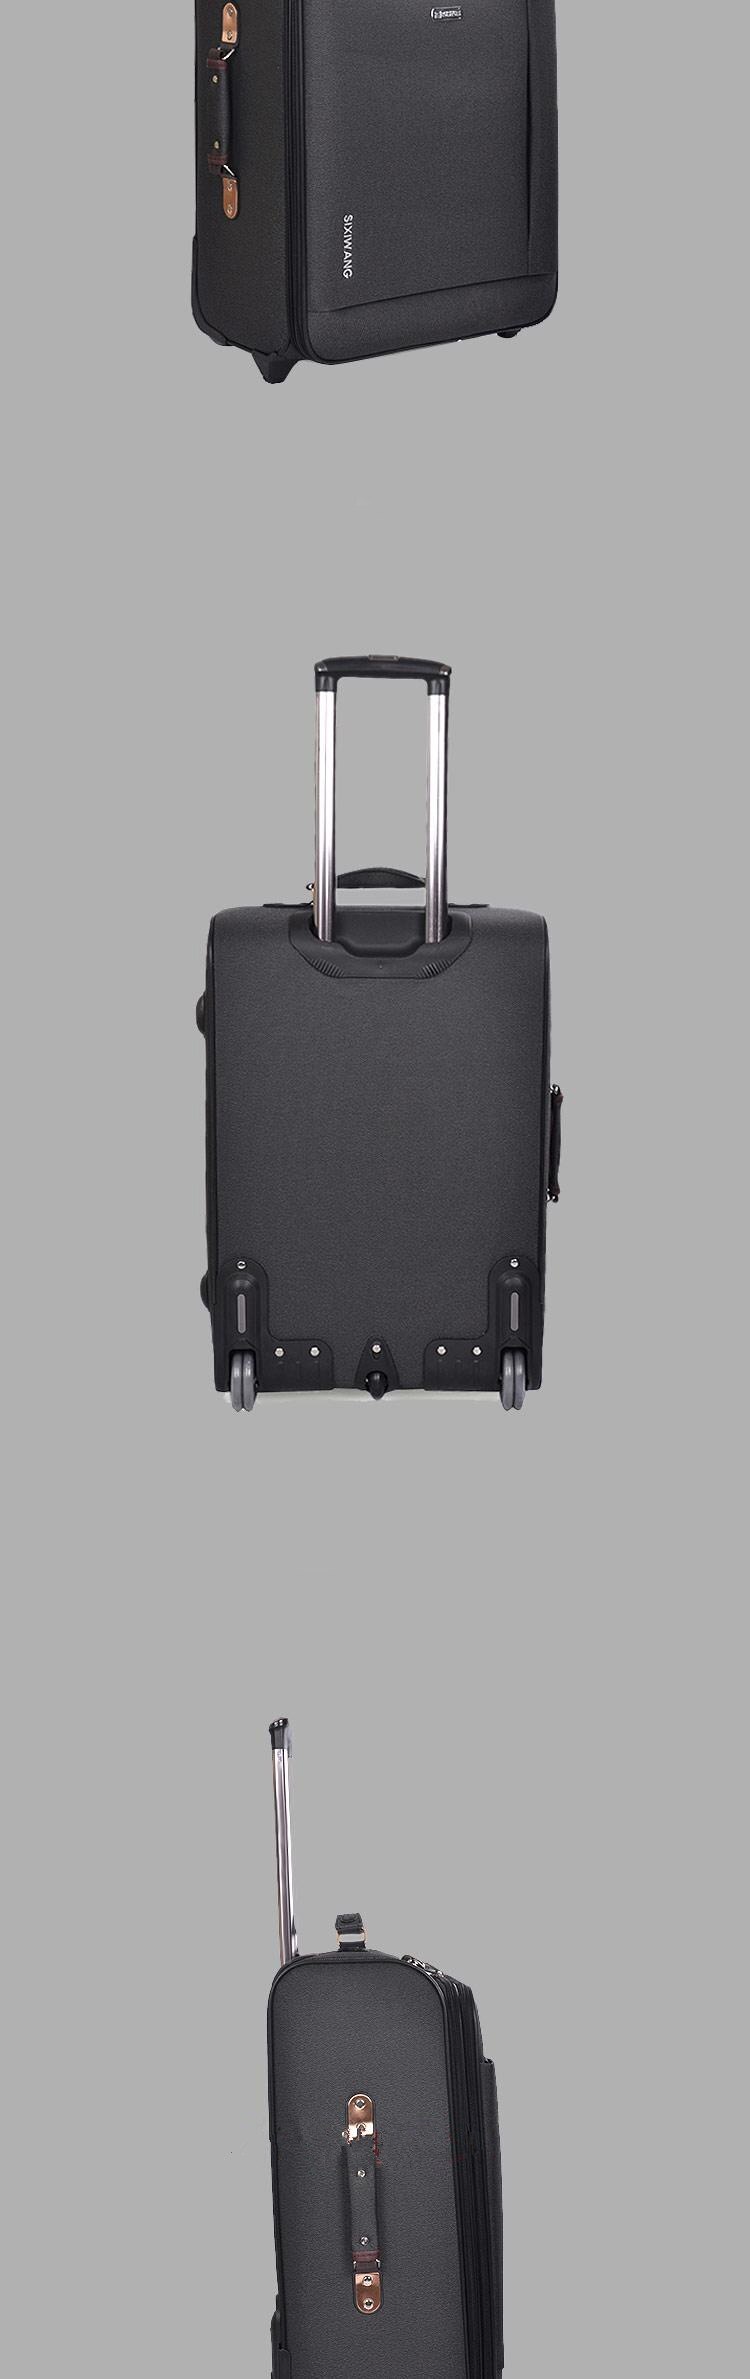 New students Travel Luggage Oxford suitcase Men high quality Rolling luggage On Wheels Women brand Trolley Suitcase travel bag